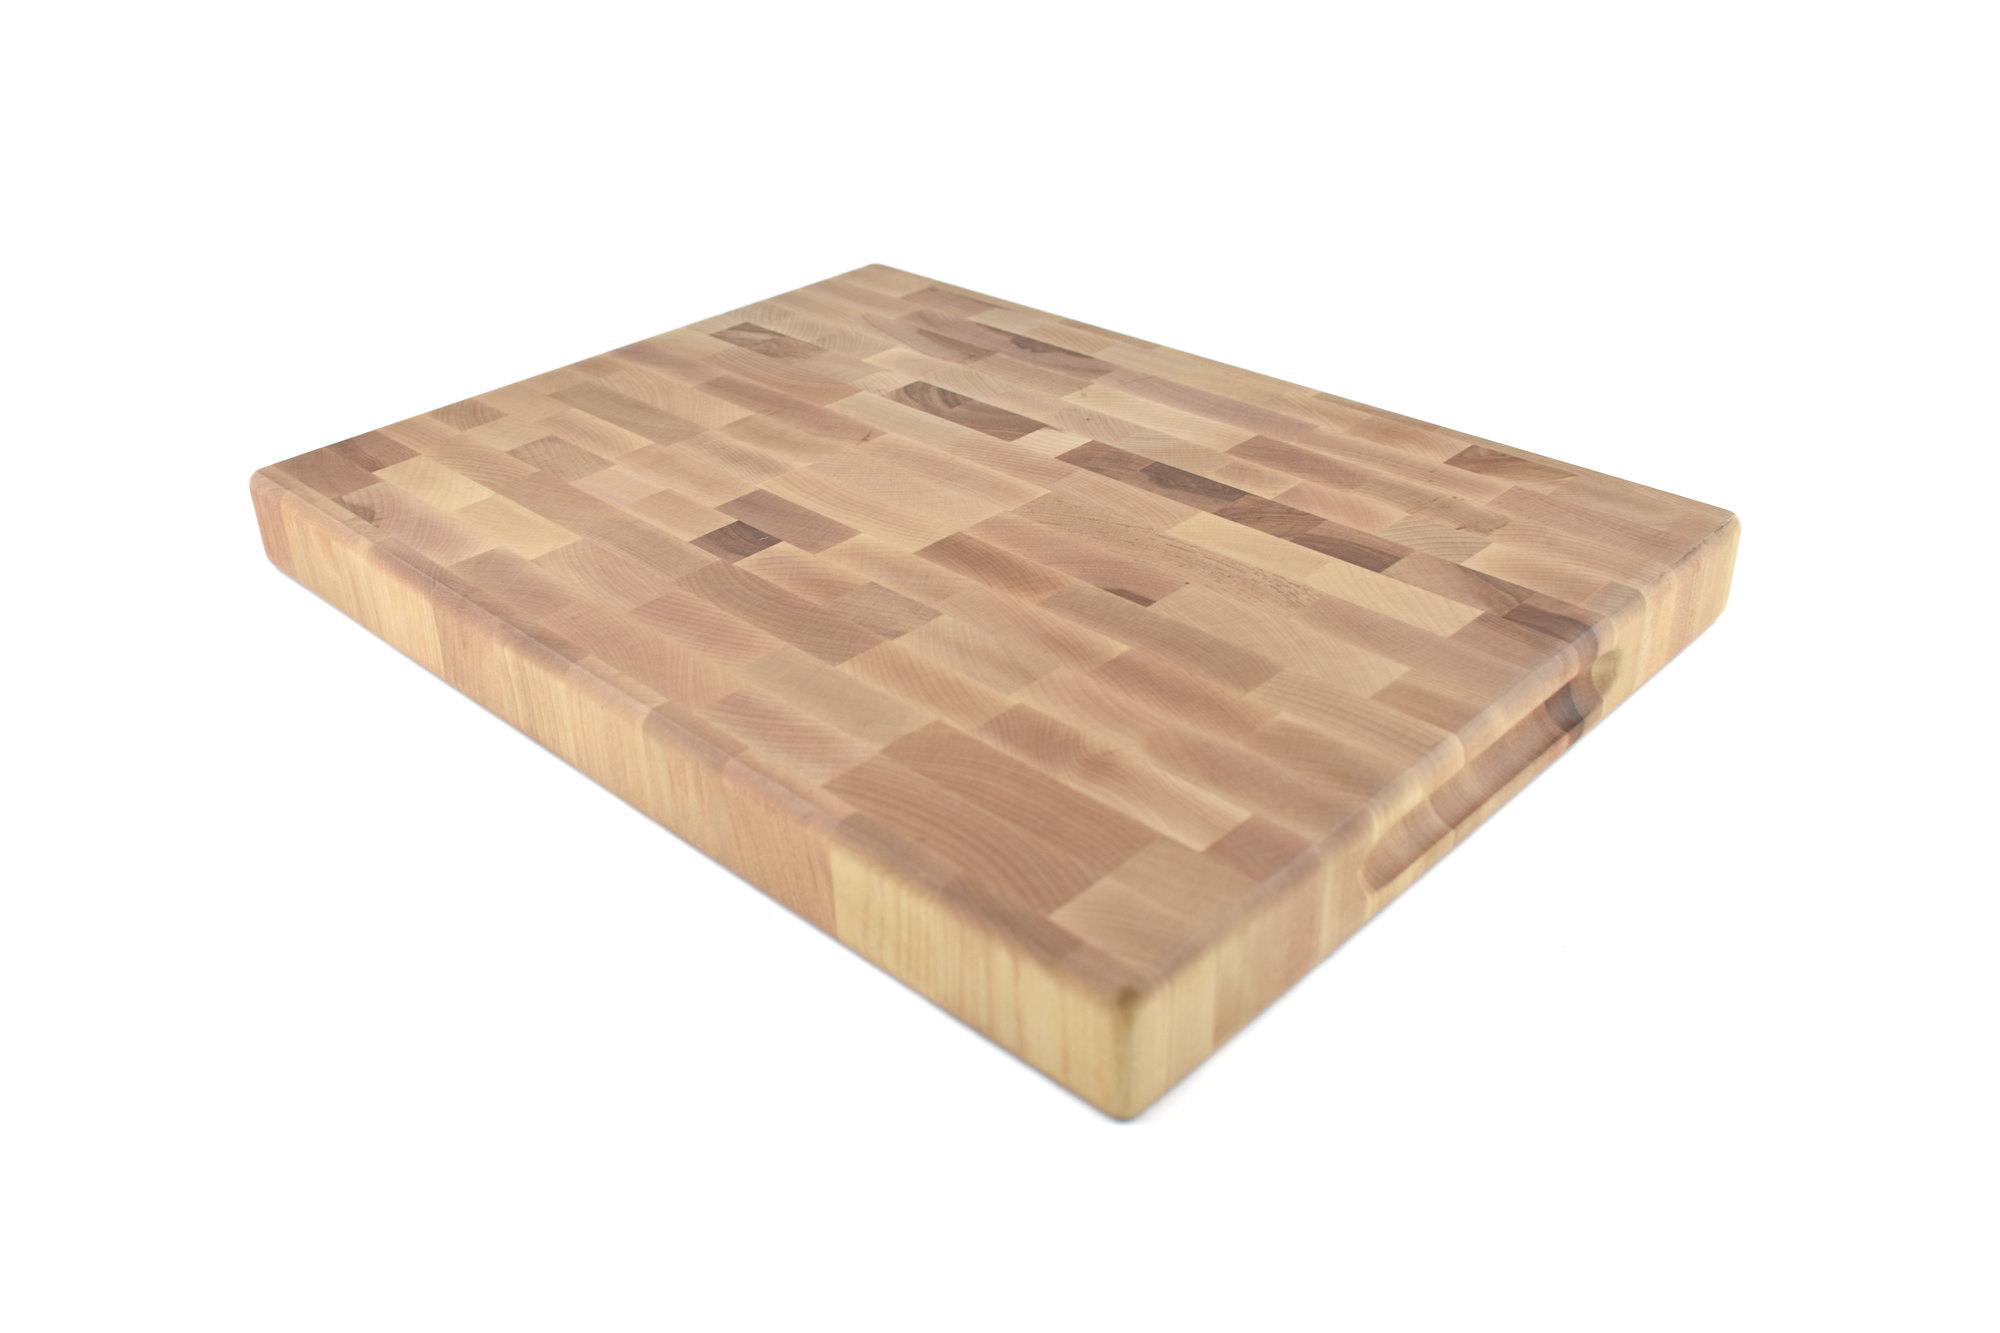 Medium Maple End grain butcher block with side handle indents